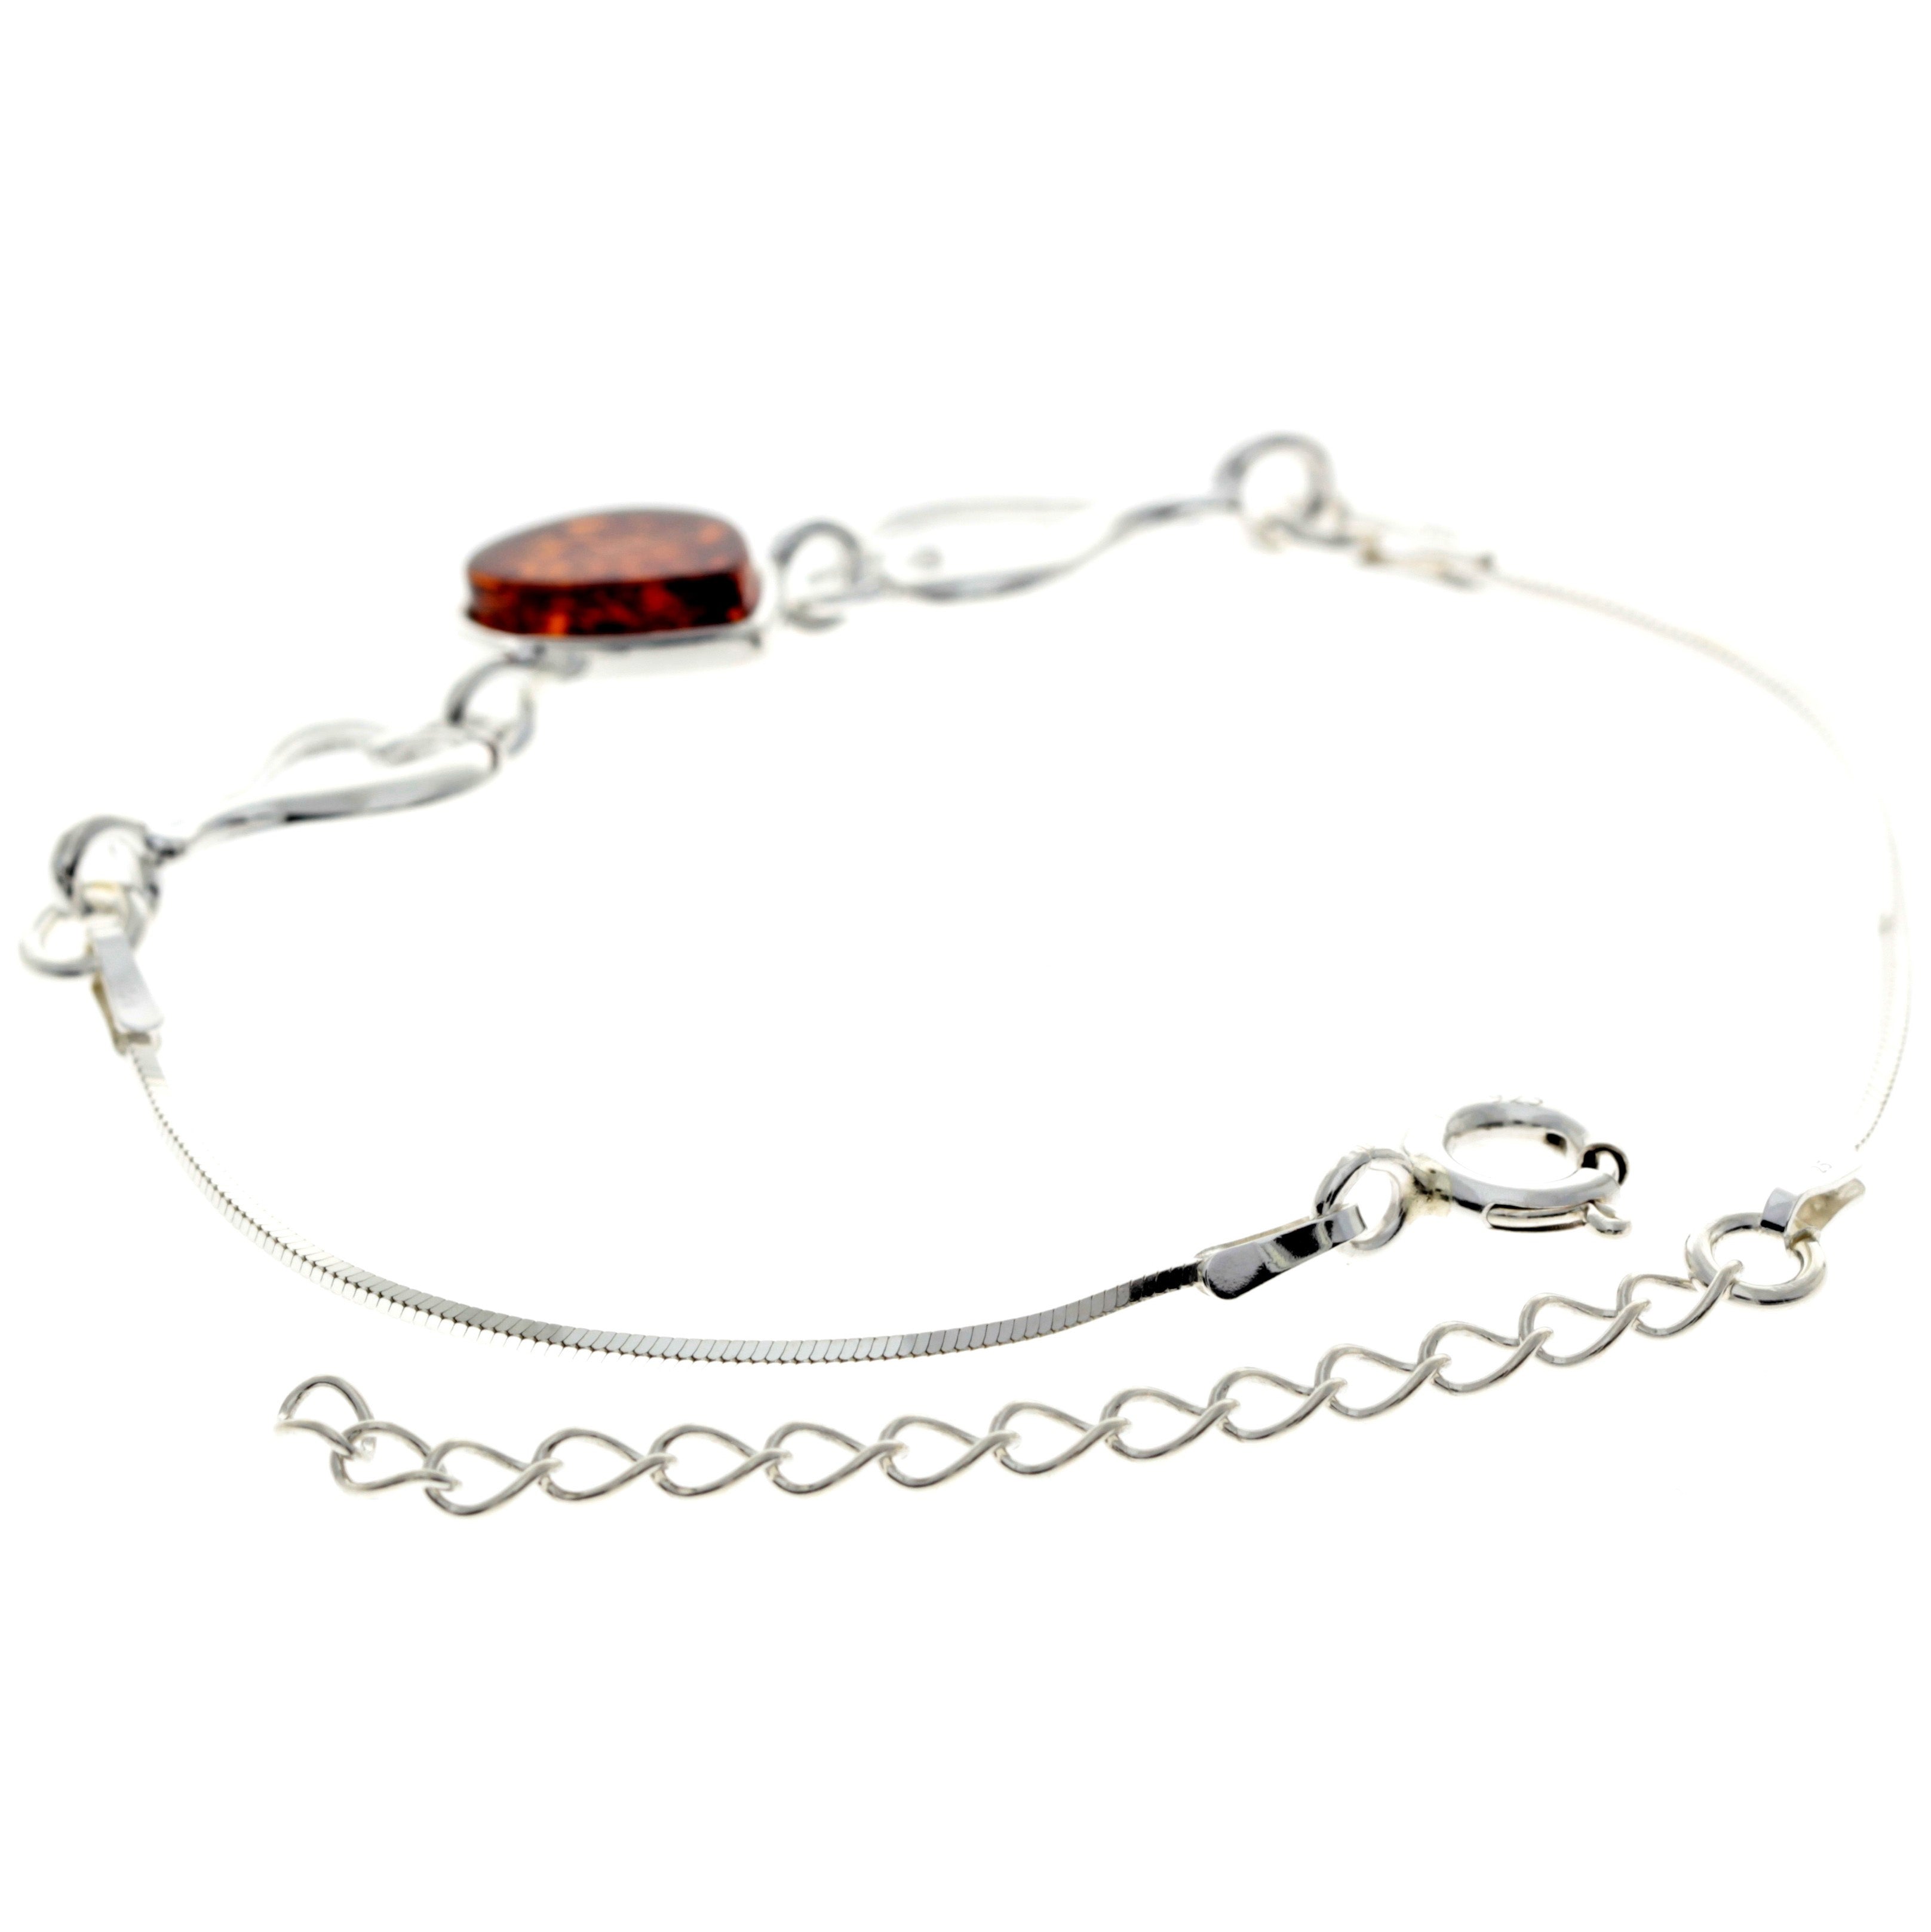 925 Sterling Silver & Baltic Amber Adjustable Bracelet with Silver Hearts - M567